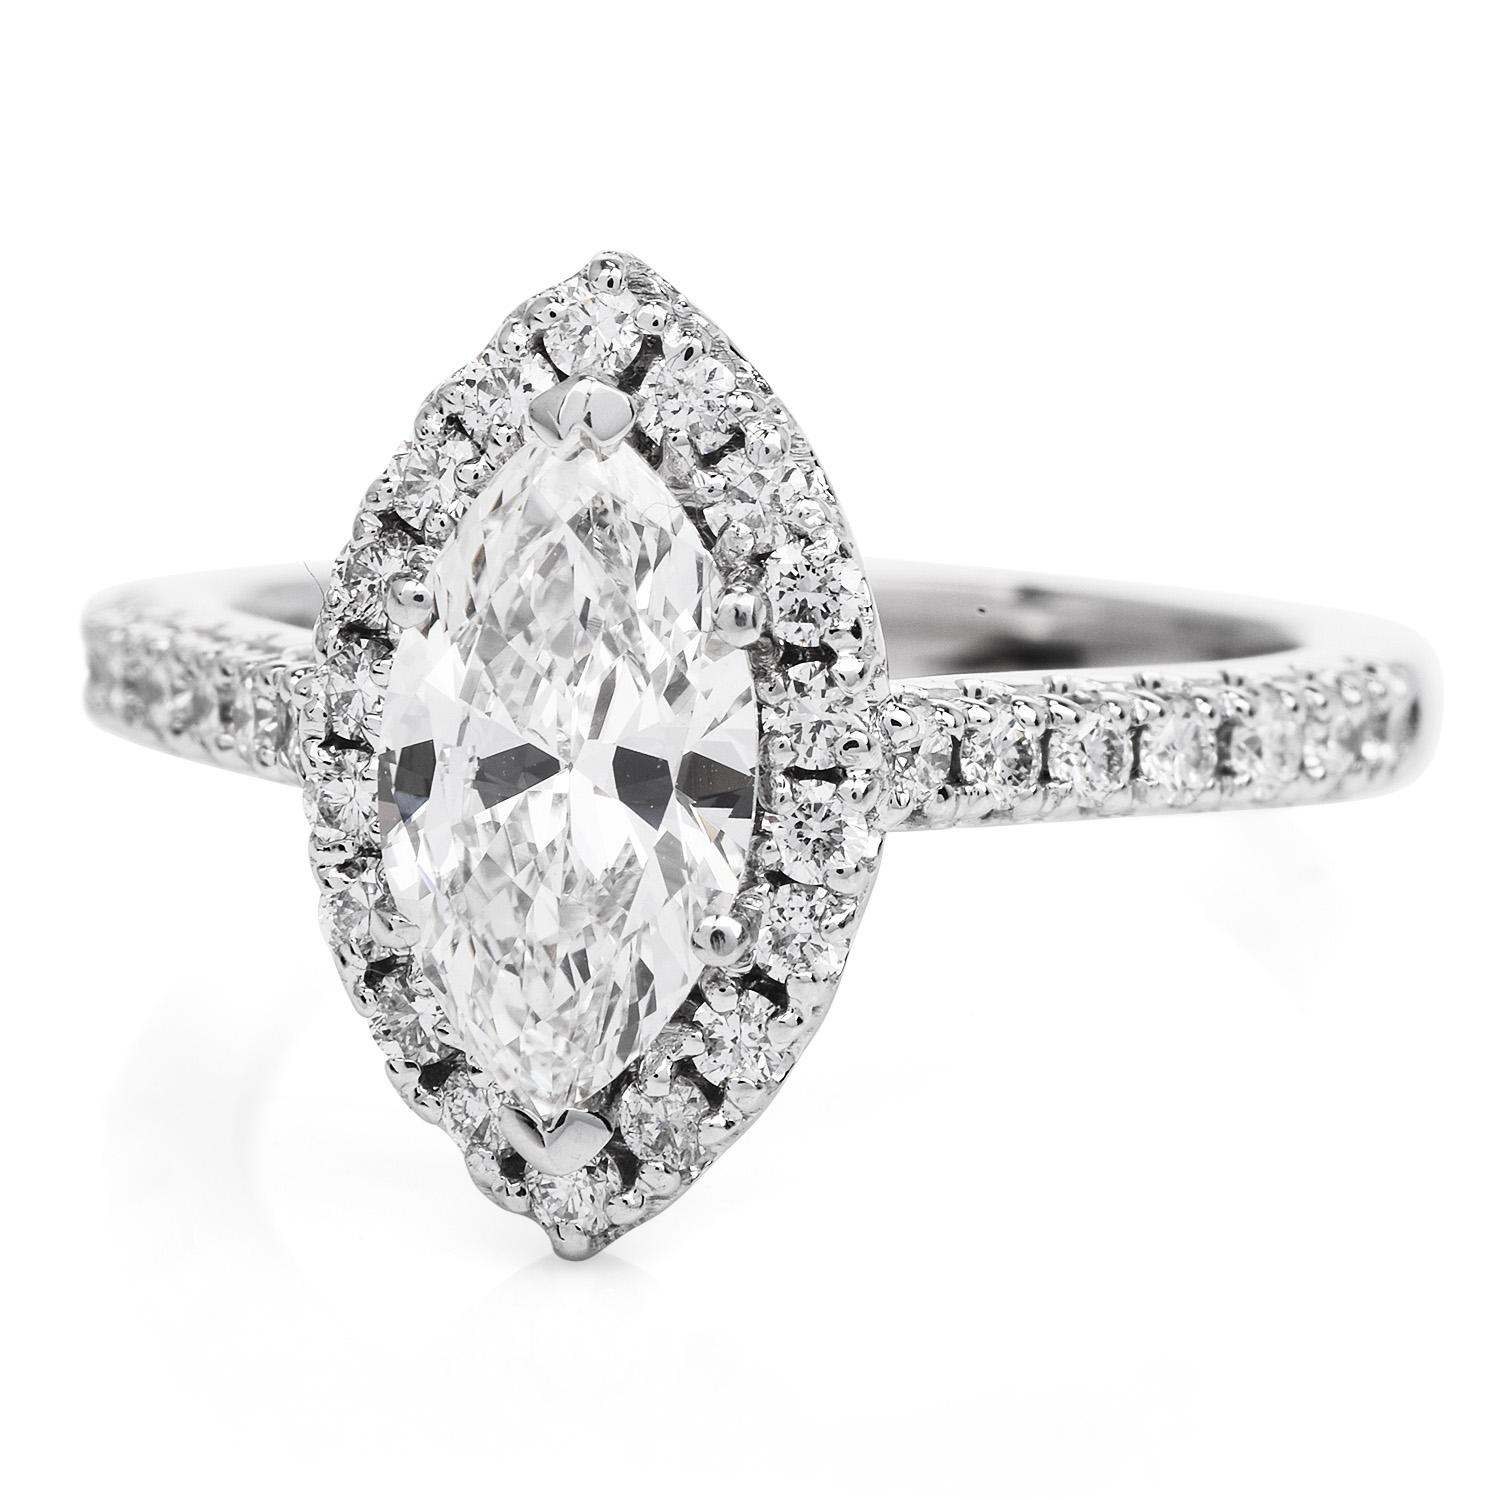 Feel Beloved with this Elongated Marquise Engagement Ring! 

This classic diamond engagement ring is crafted in solid 14k white gold.

Displaying a Center GIA graded 1.18 Carats Marquise cut Diamond, H color,  VVS2 clarity. Surrounded by 34